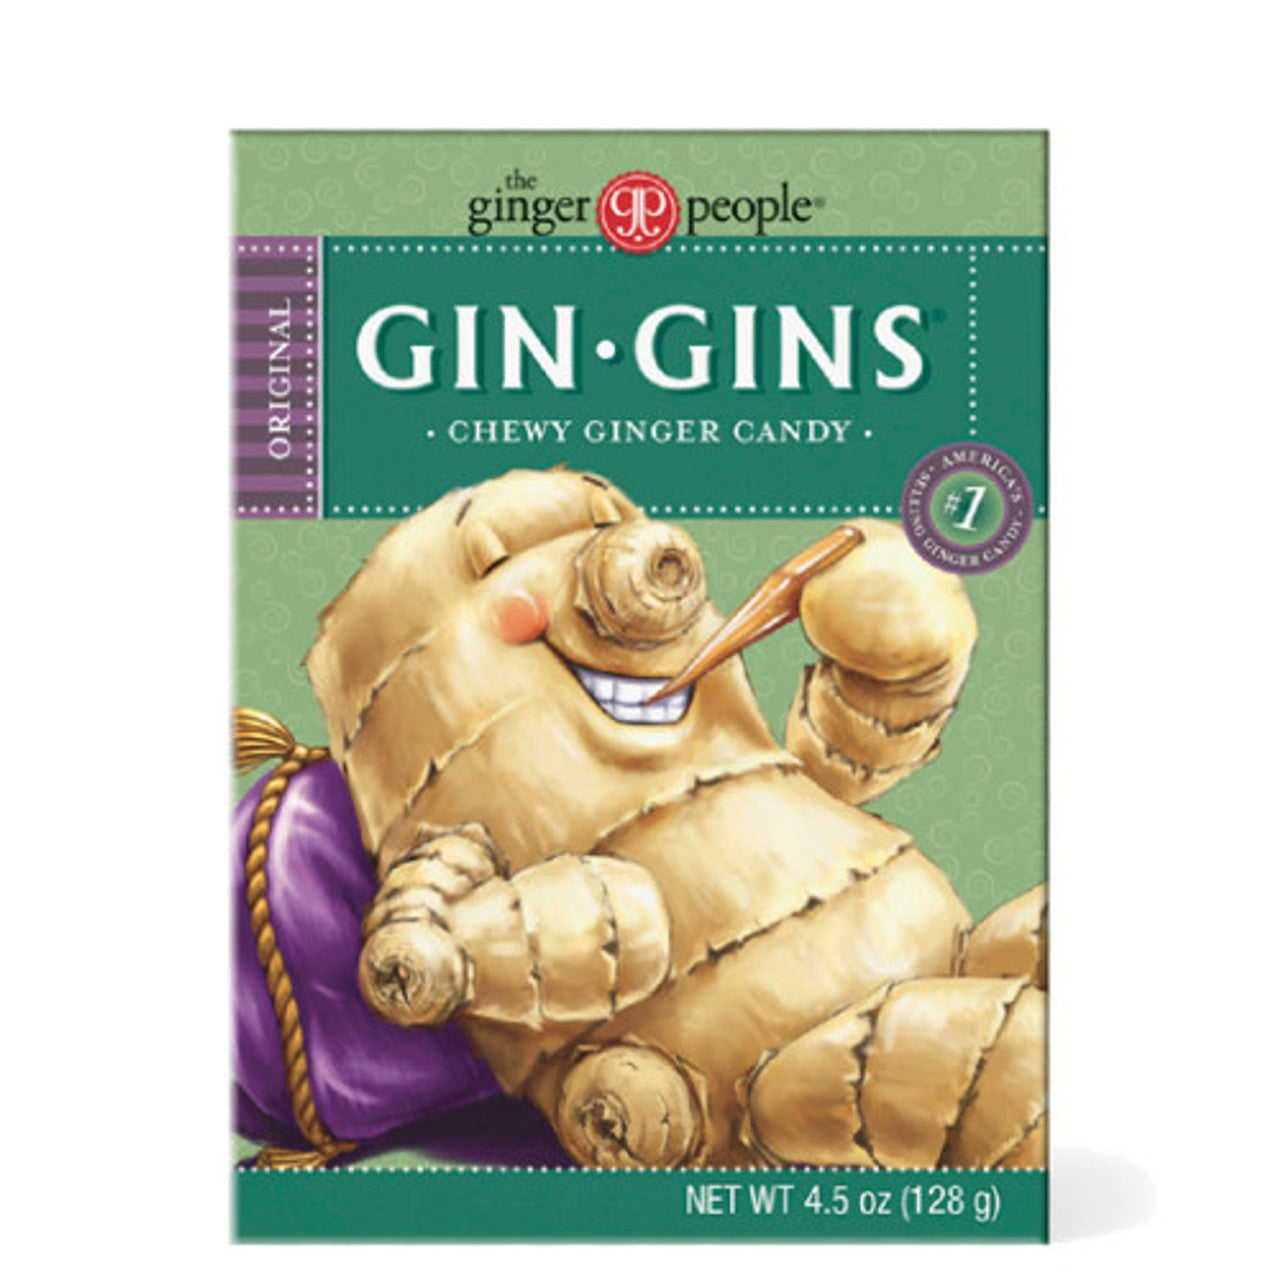 GIN GINS Original Chewy Ginger Candy 45 grams